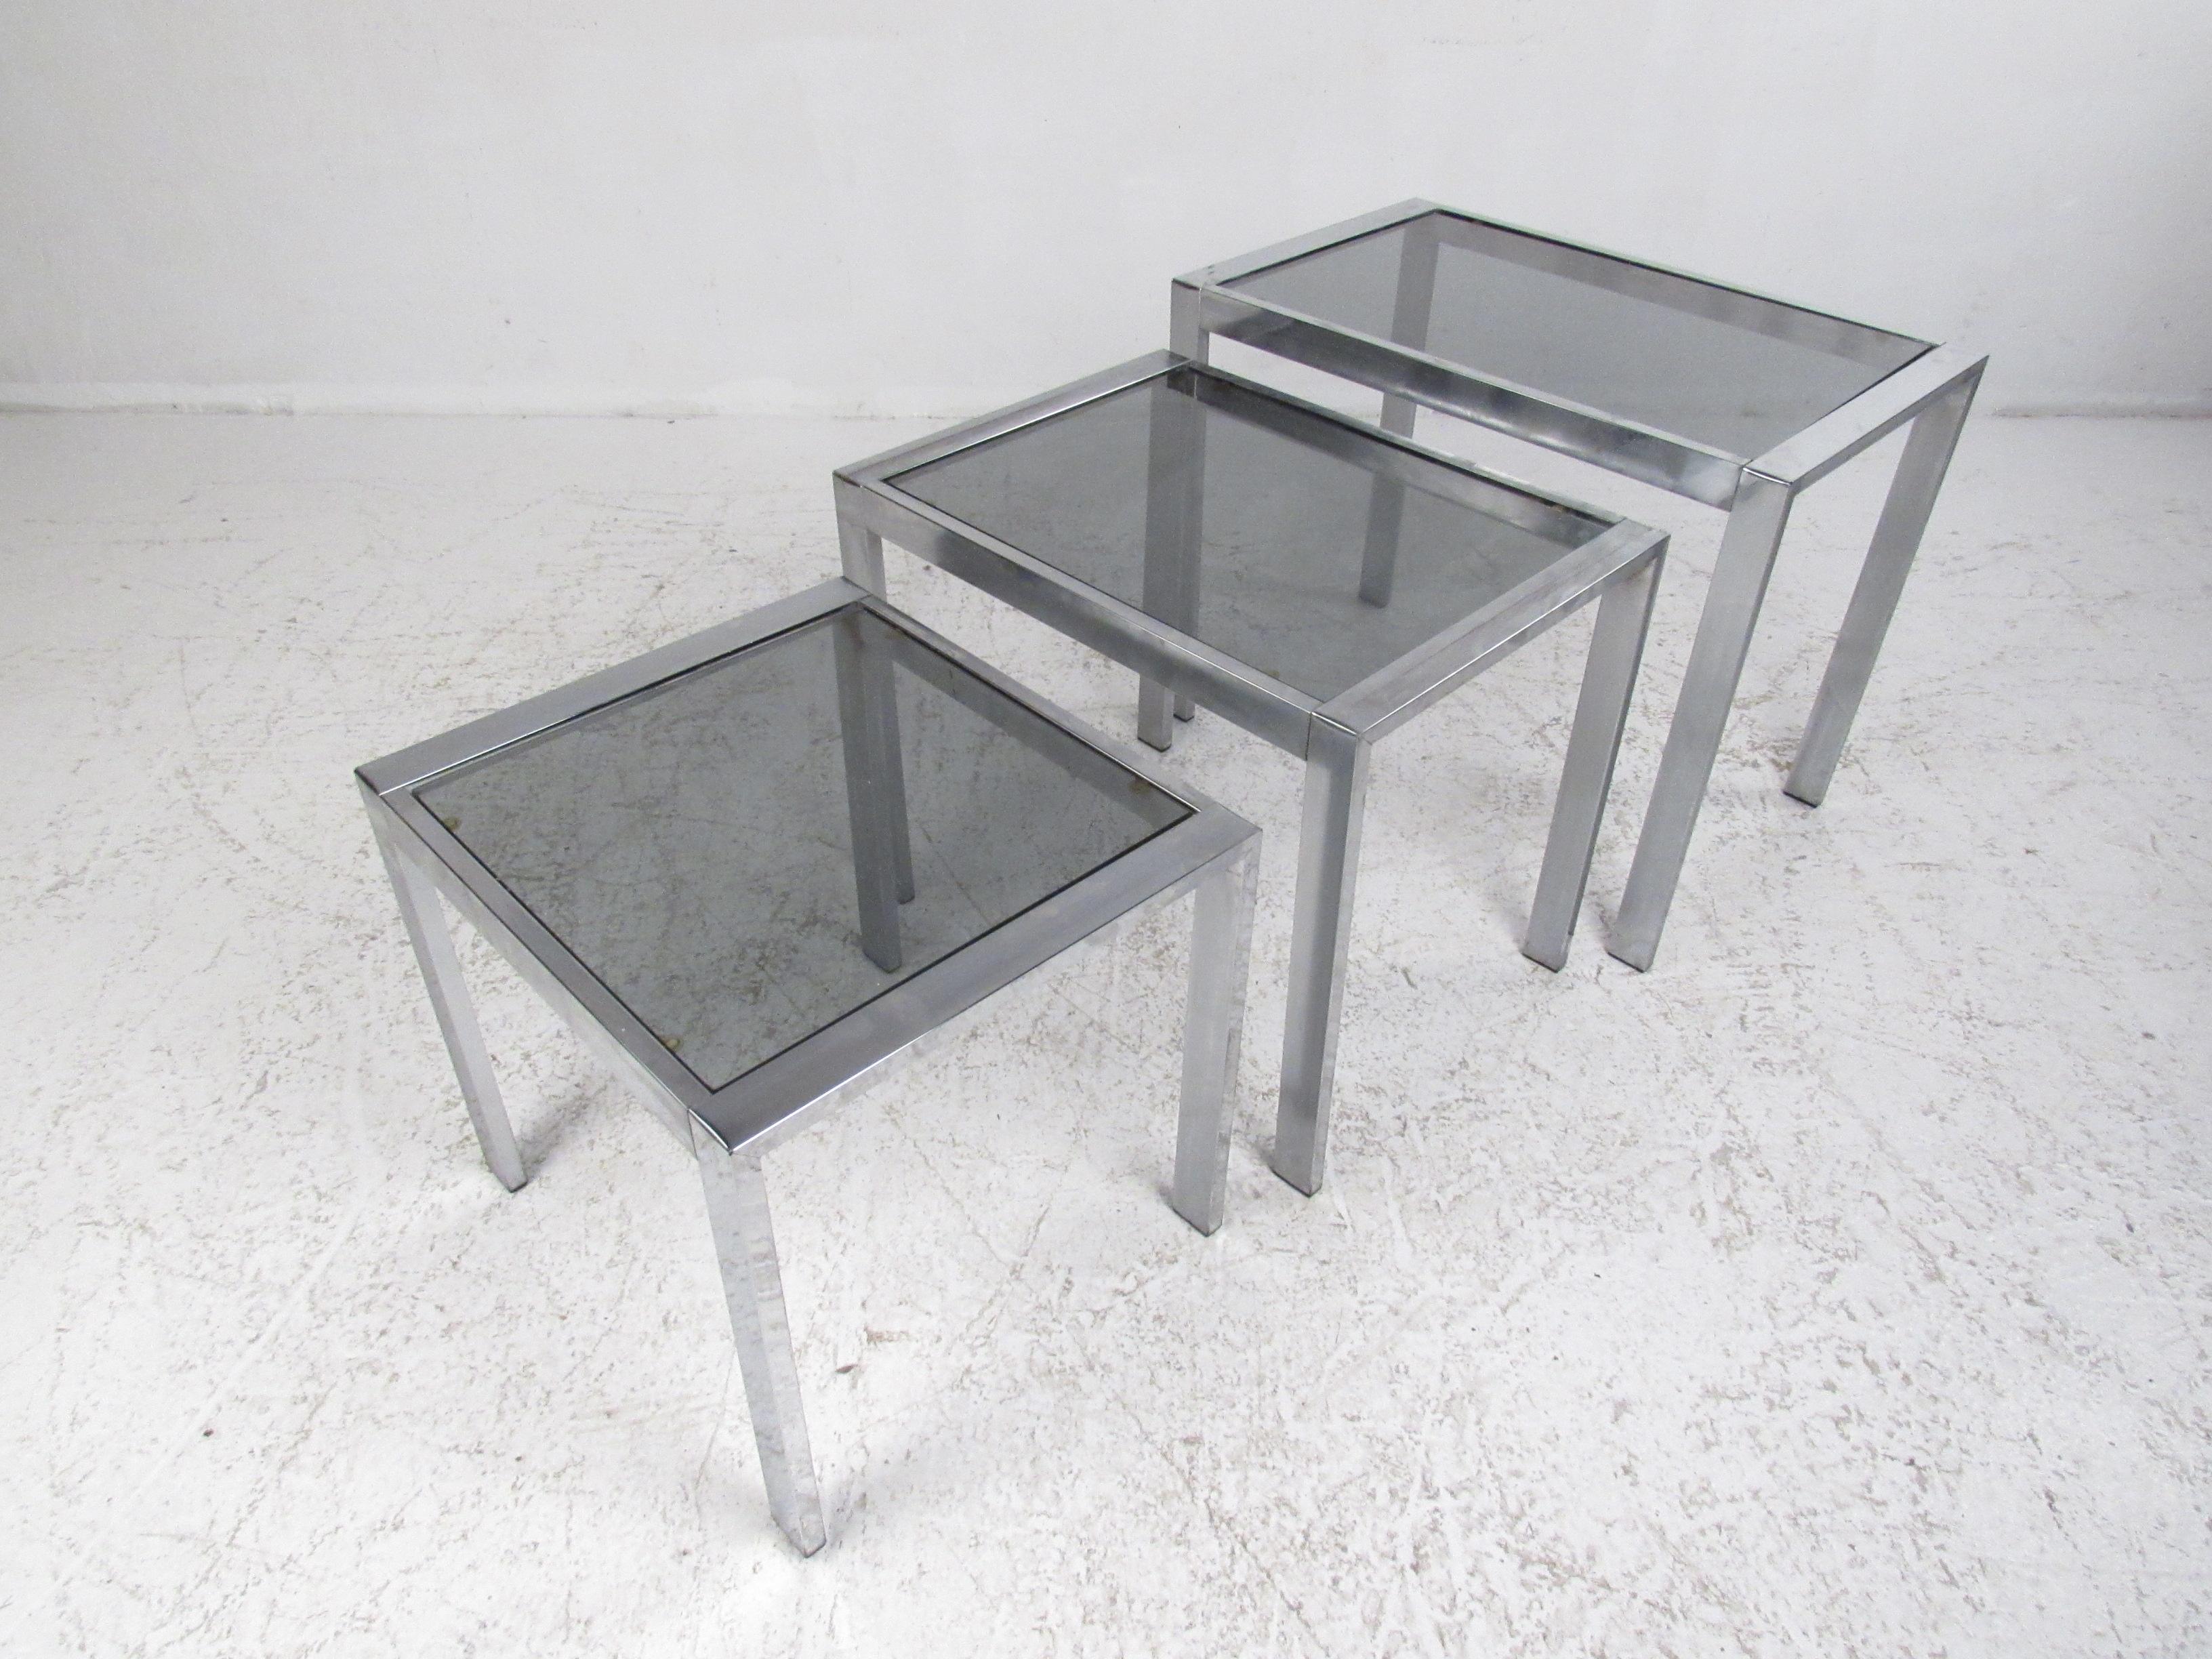 These charming tables will fit perfectly in and small nook or bedroom. They can function in a living room or family room as well. With a simple yet stylish design, these tables will catch the eye of anyone who sees them. Clean lines and